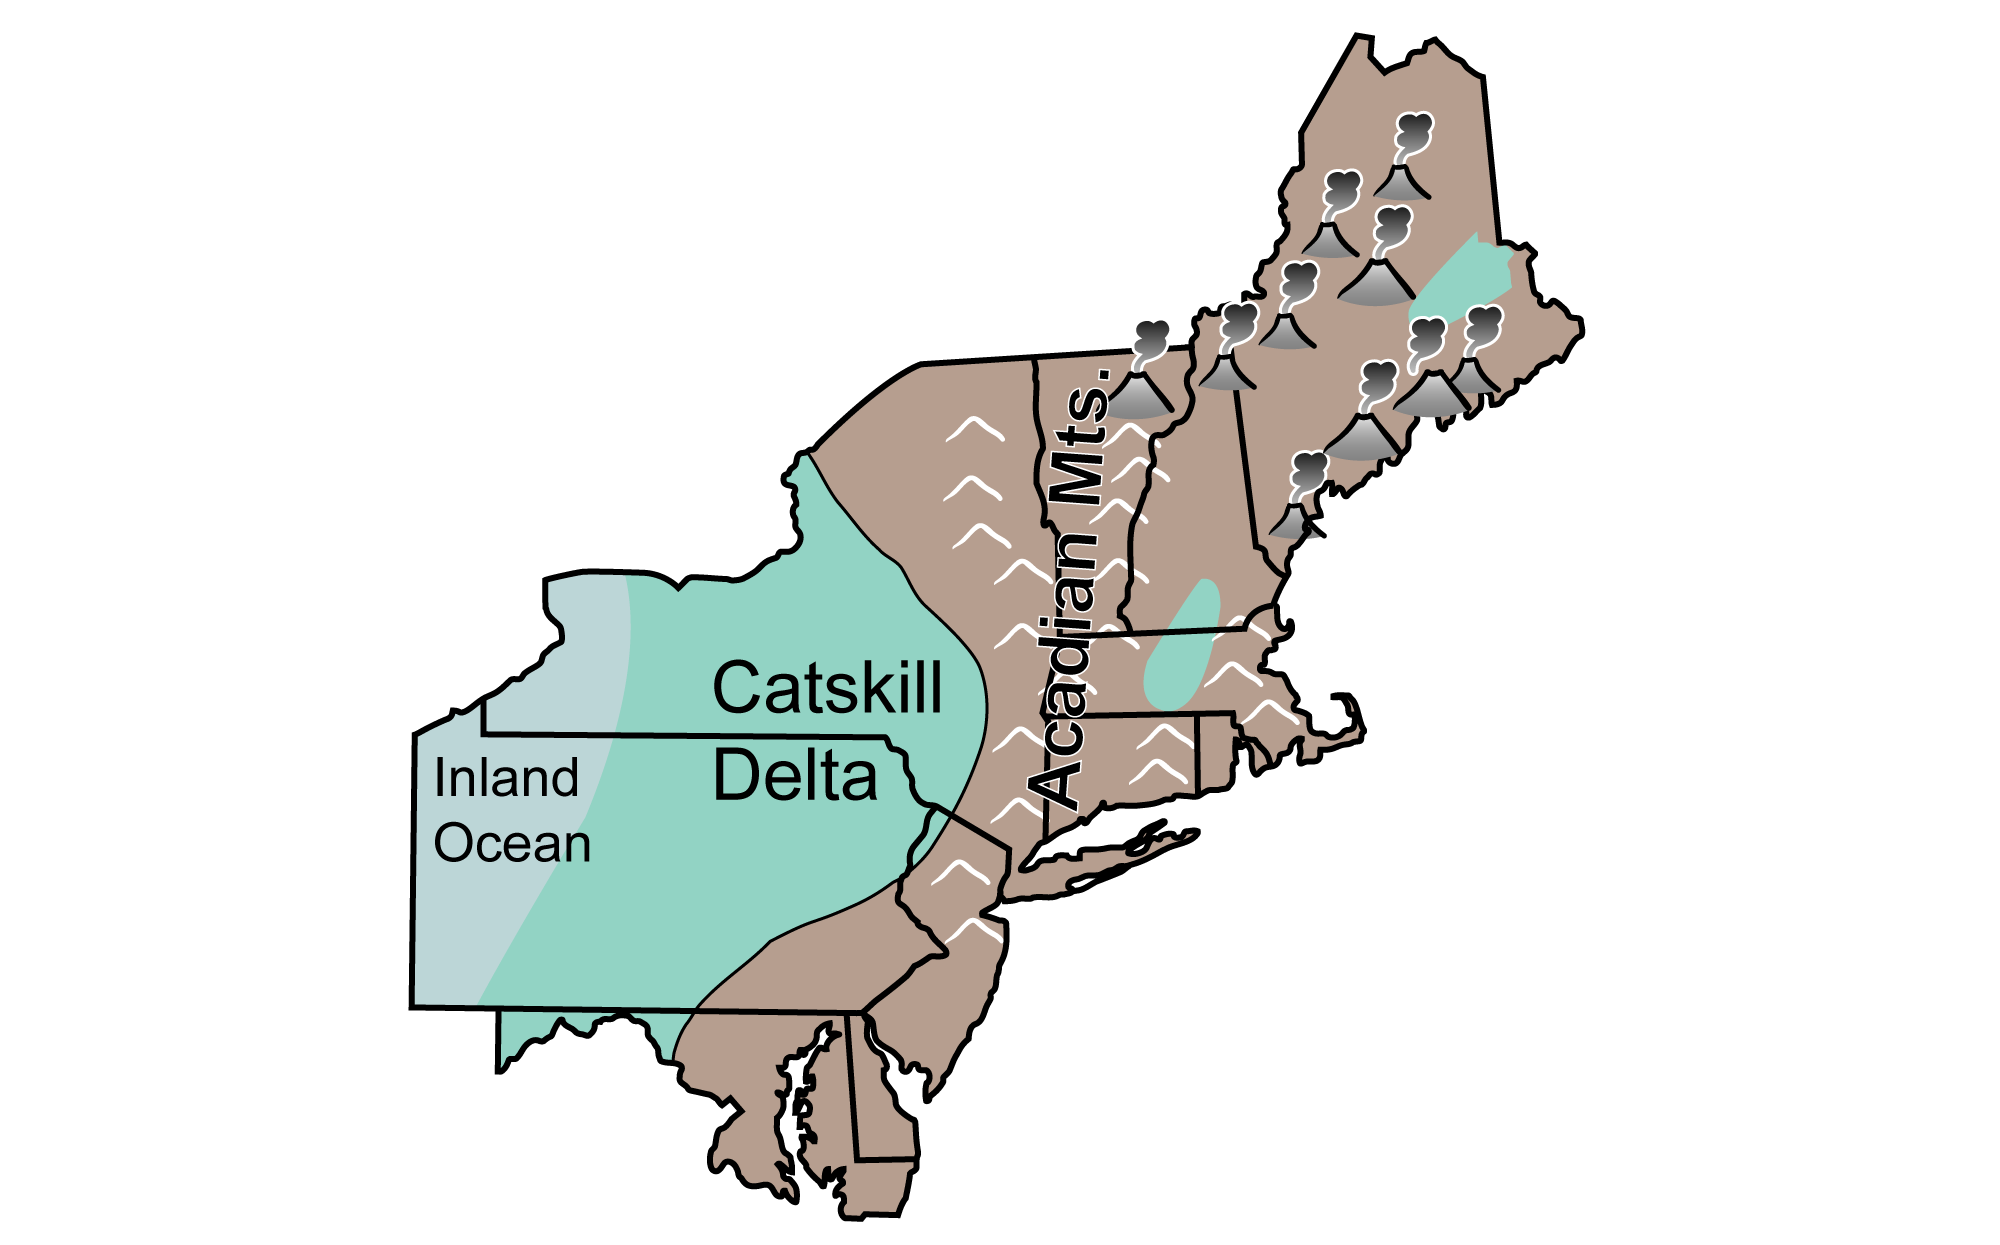 Map of the northeastern United States showing what the paleogeography likely looked like during the Devonian period.